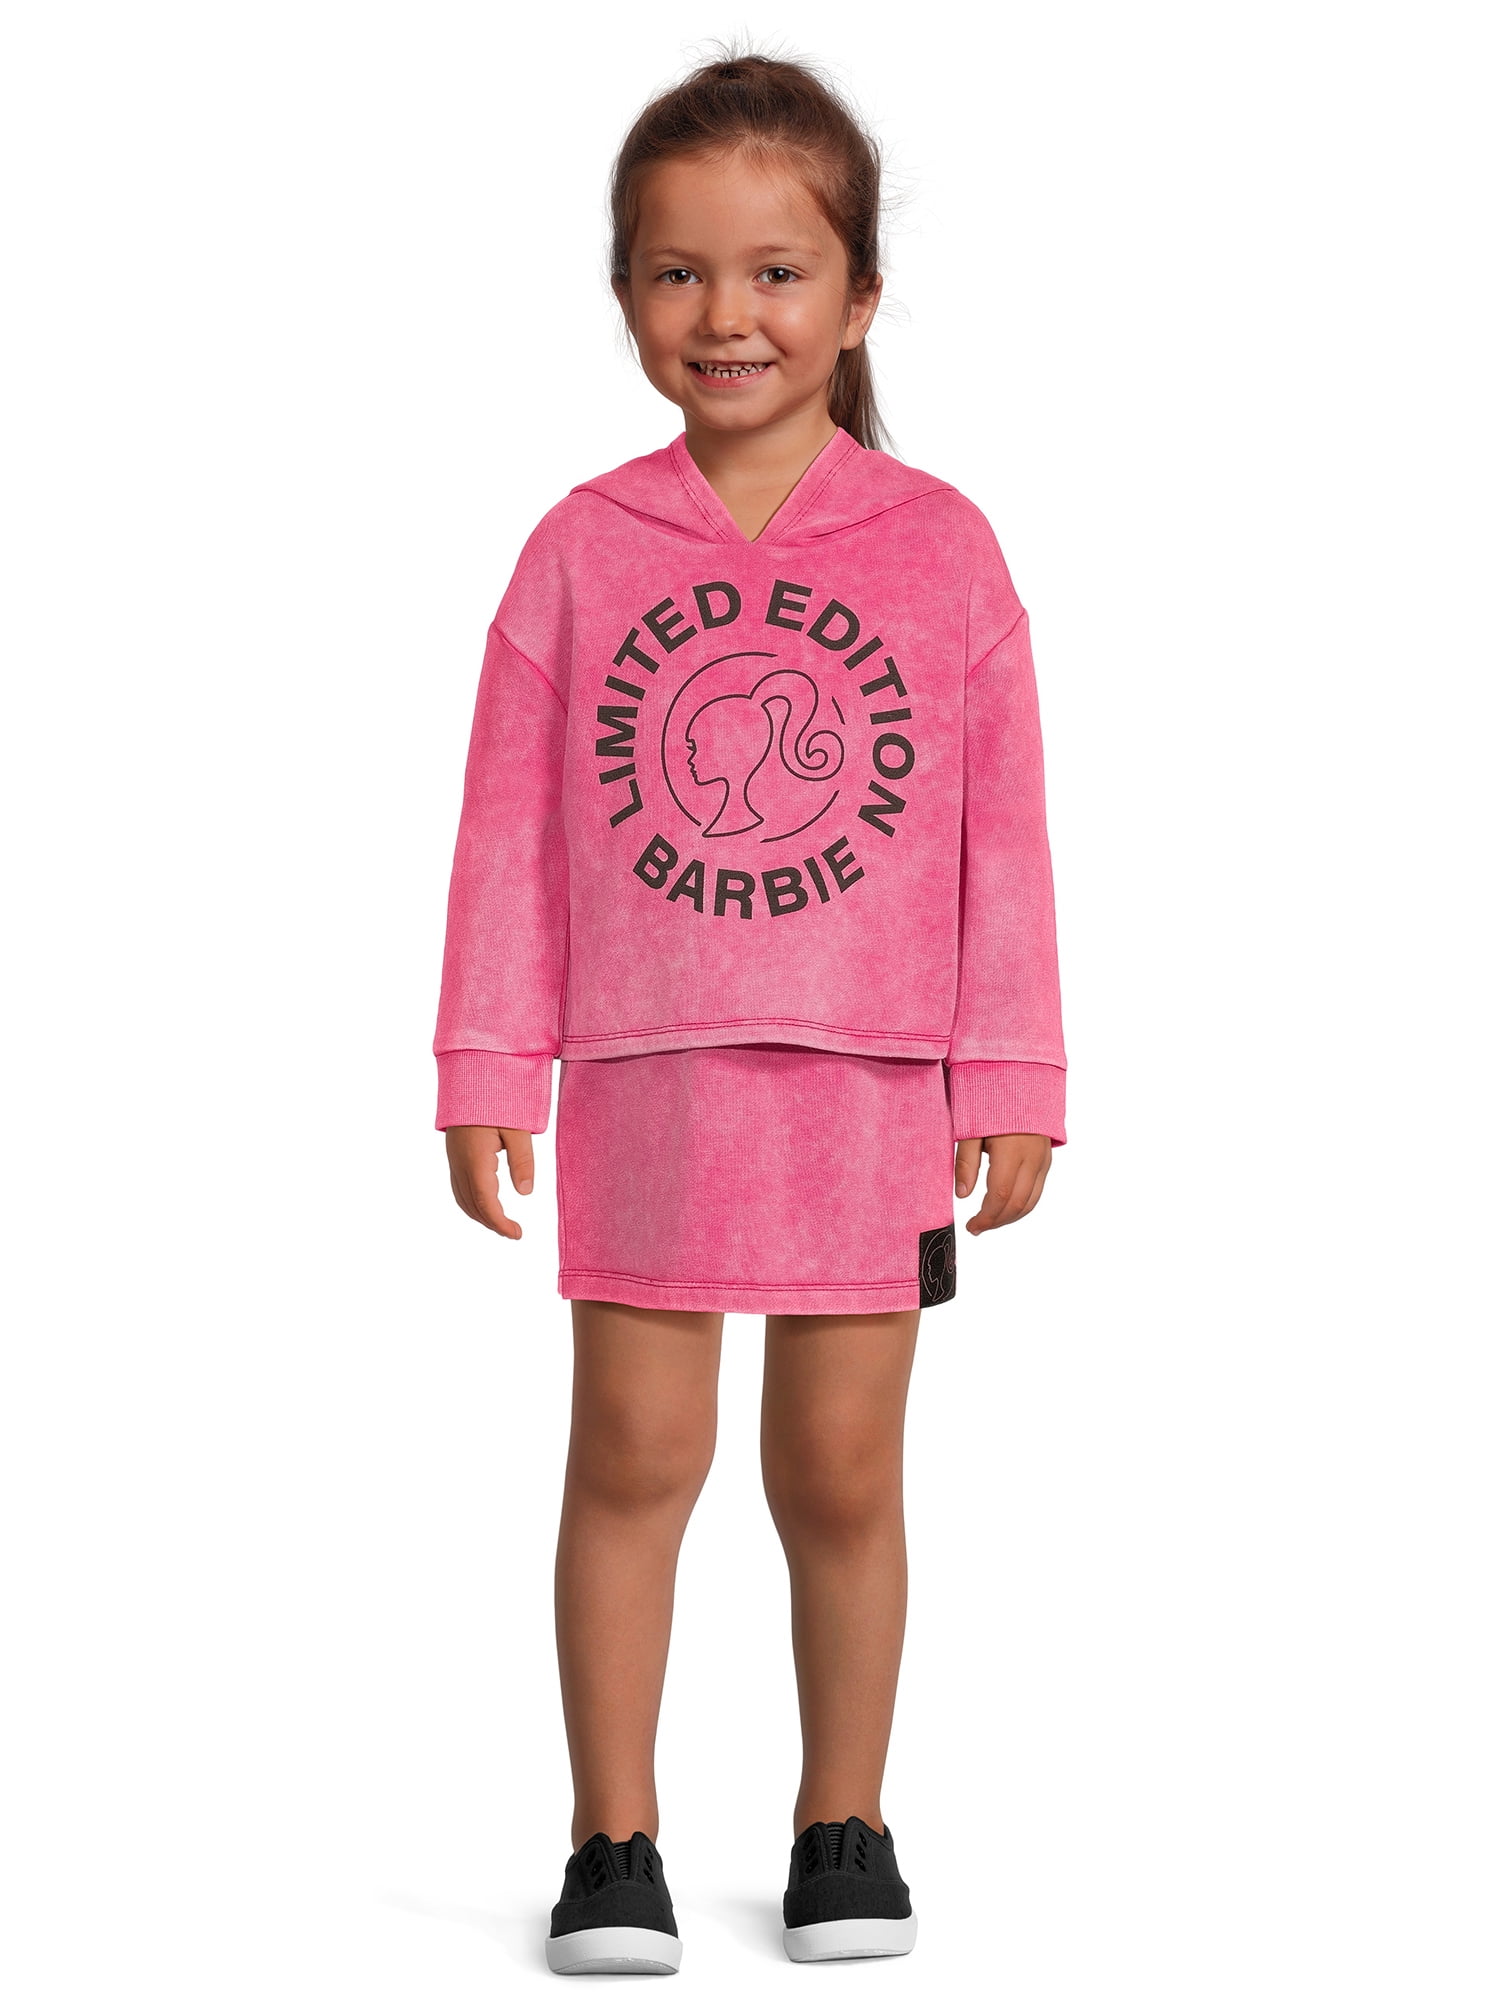 Barbie Toddler Girls Hoodie and Skirt Set, 2-Piece, Sizes 2T - 5T 